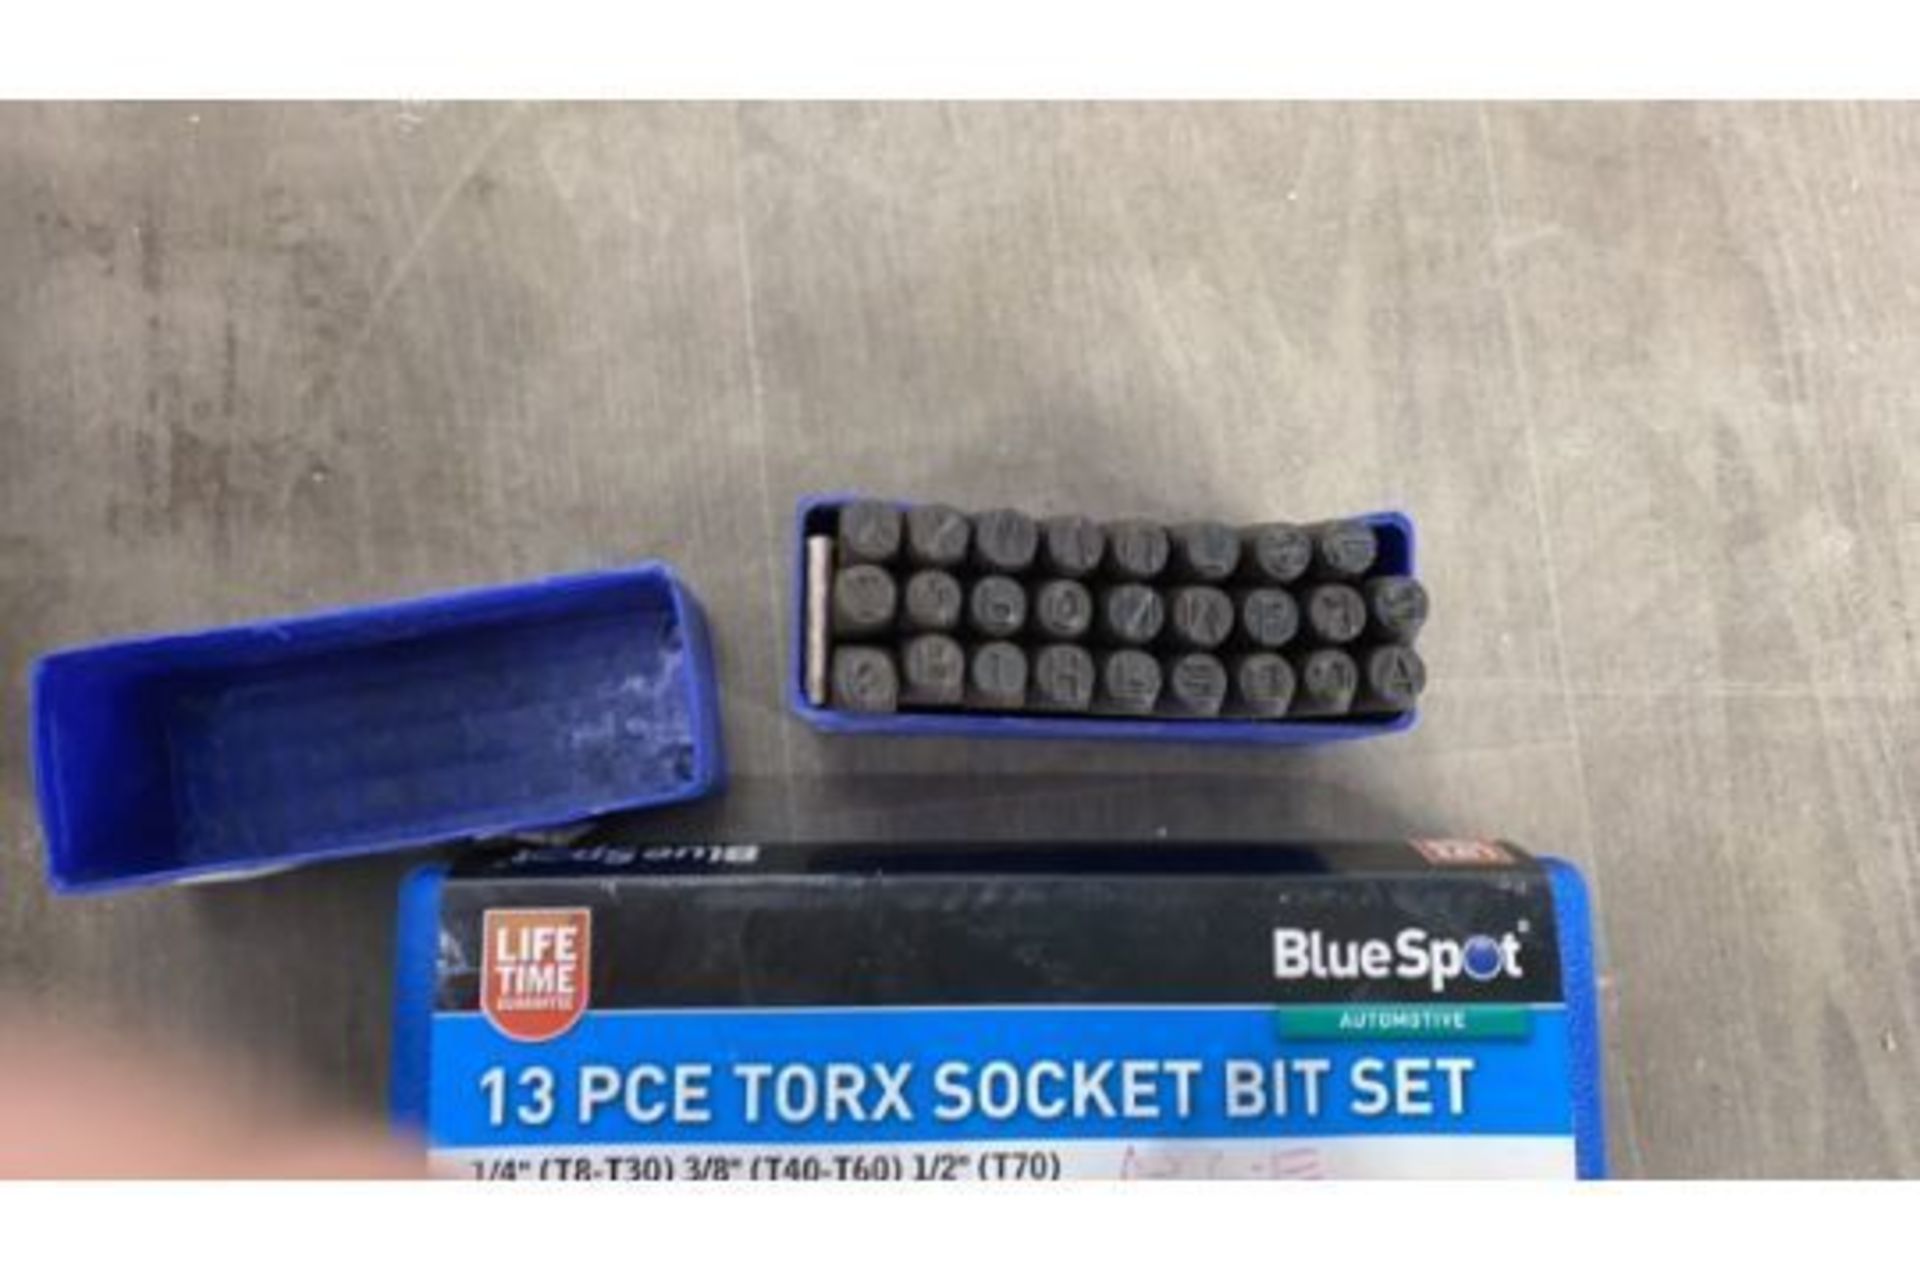 13 Pce Socket Bit Set, Letter Punches And Clarke L - Image 4 of 4